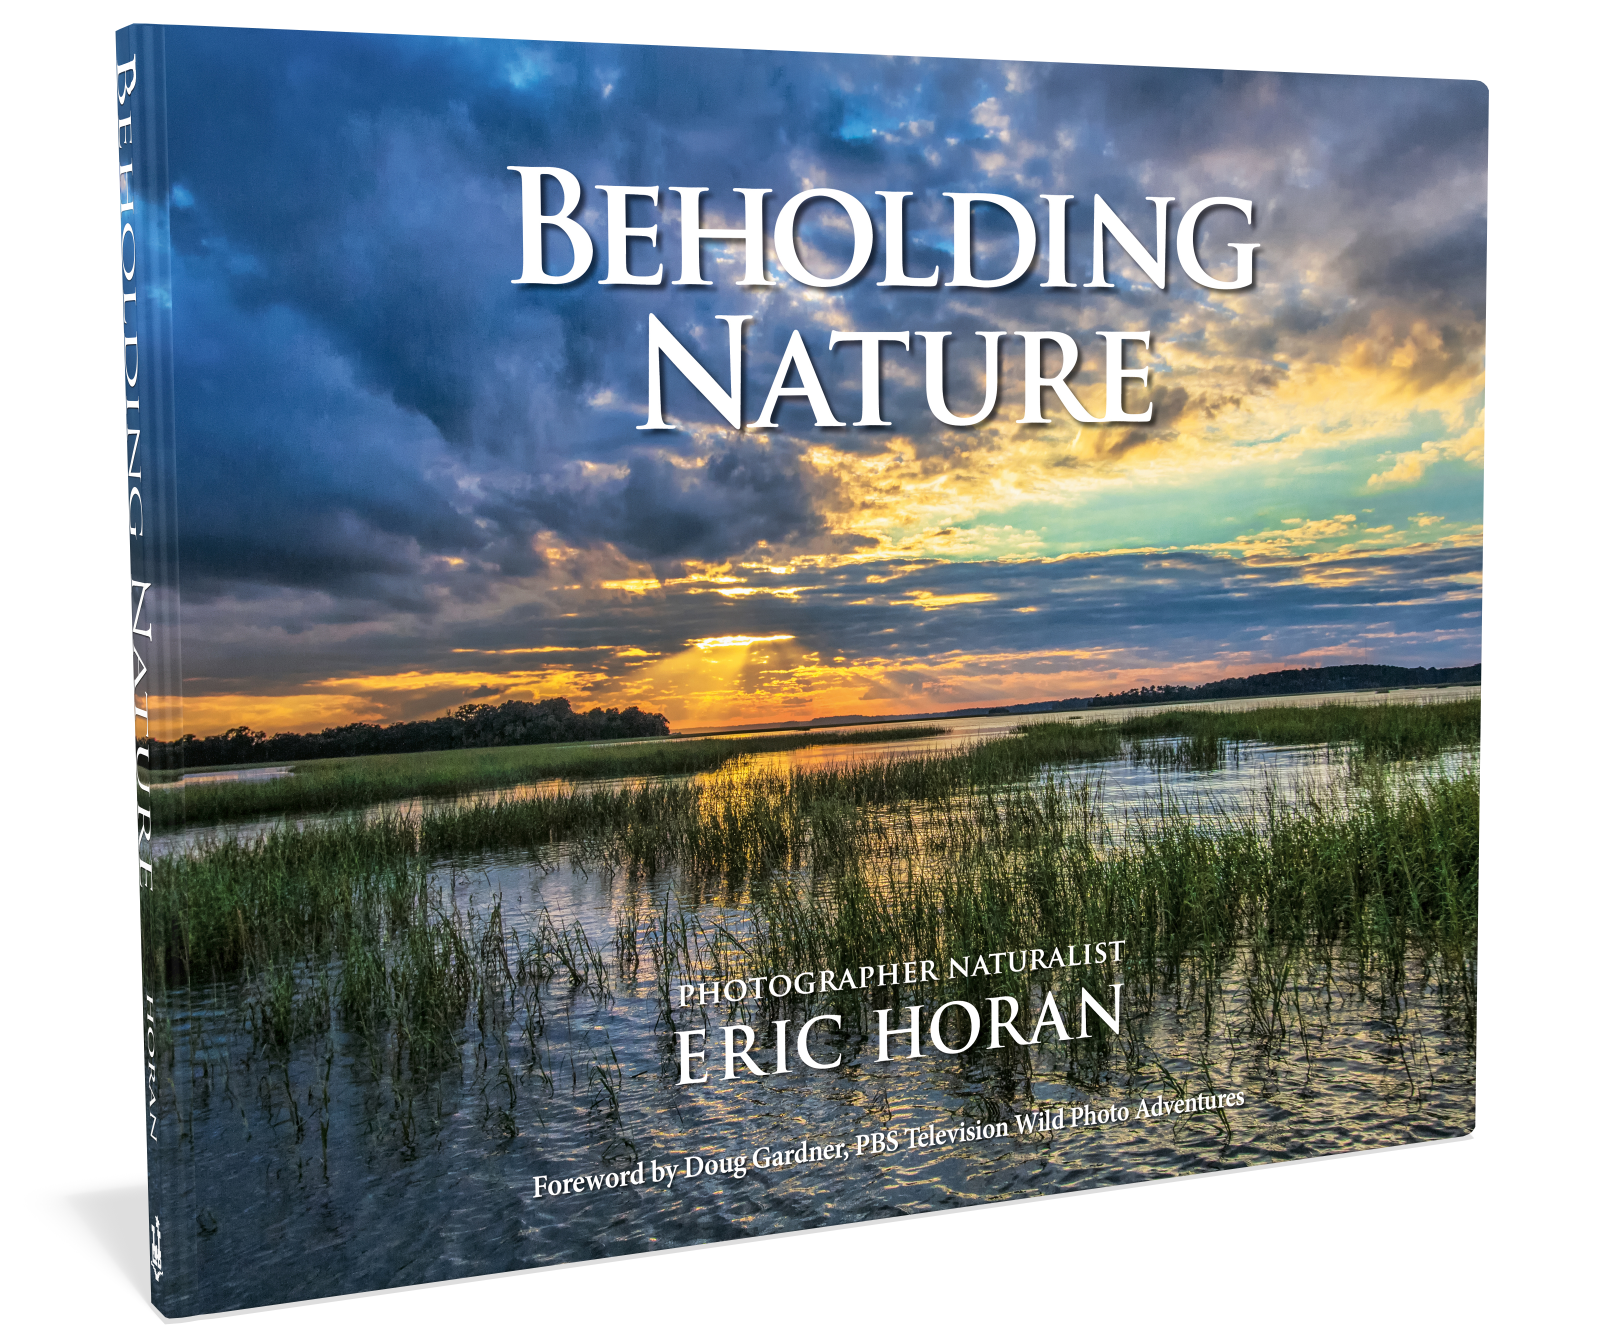 Beholding Nature Photography Book Author Eric Horan Beaufort Naturalist Features SC NC GA and FL Wildlife and Landscapes